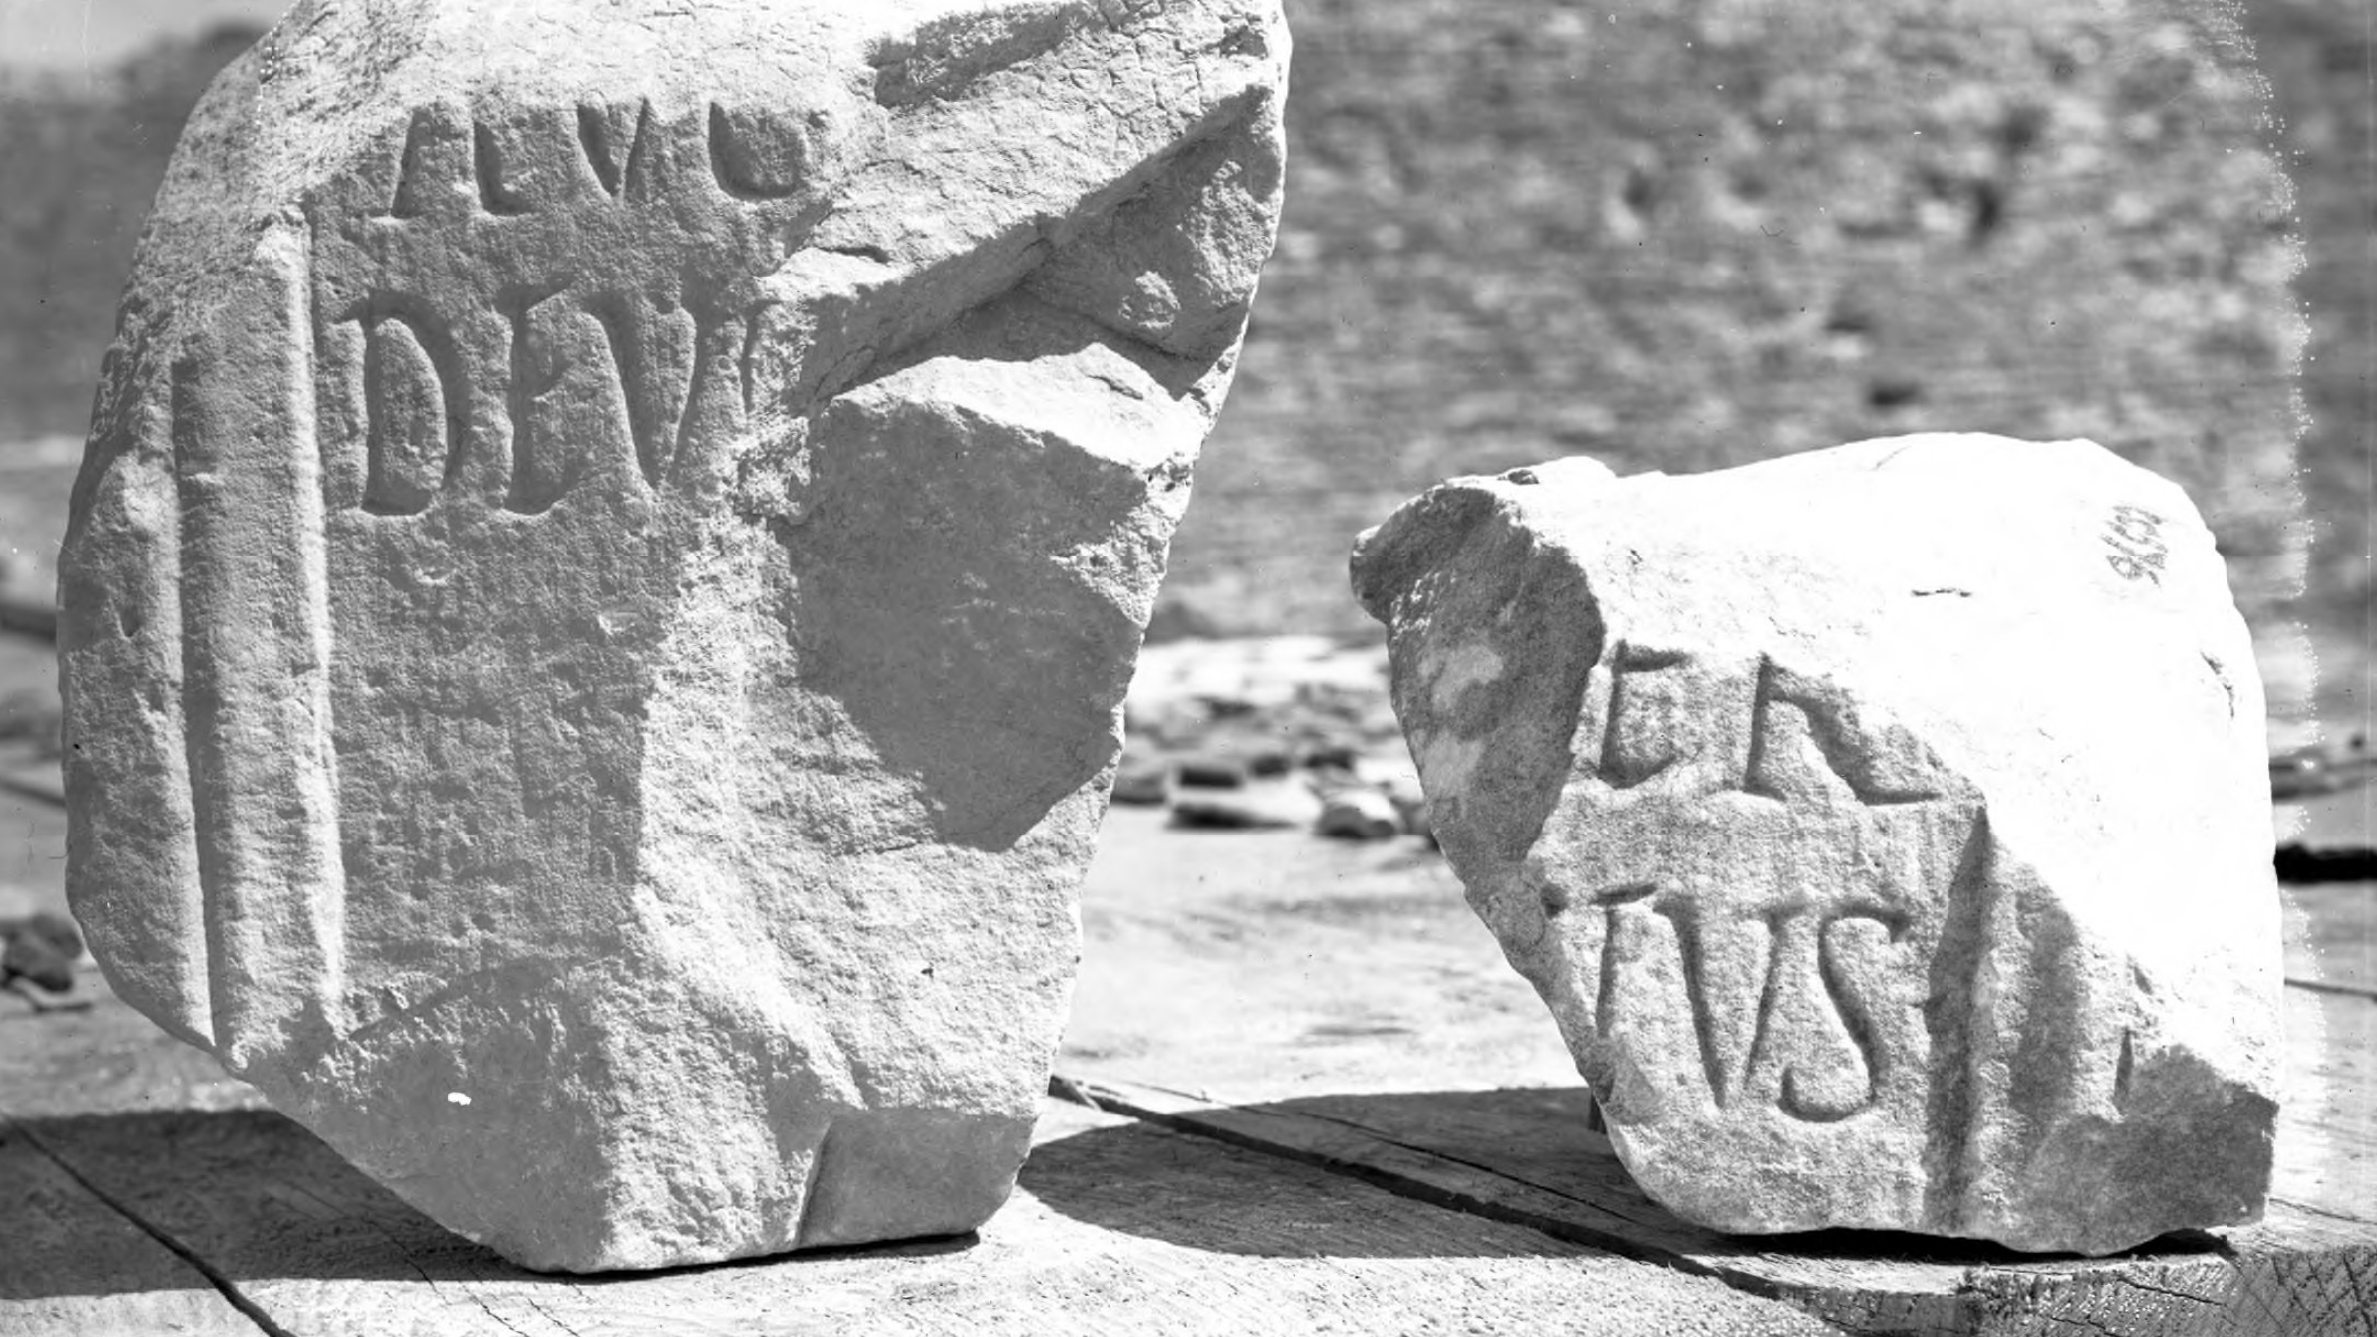 Black and white photograph of two stone fragments with inscriptions